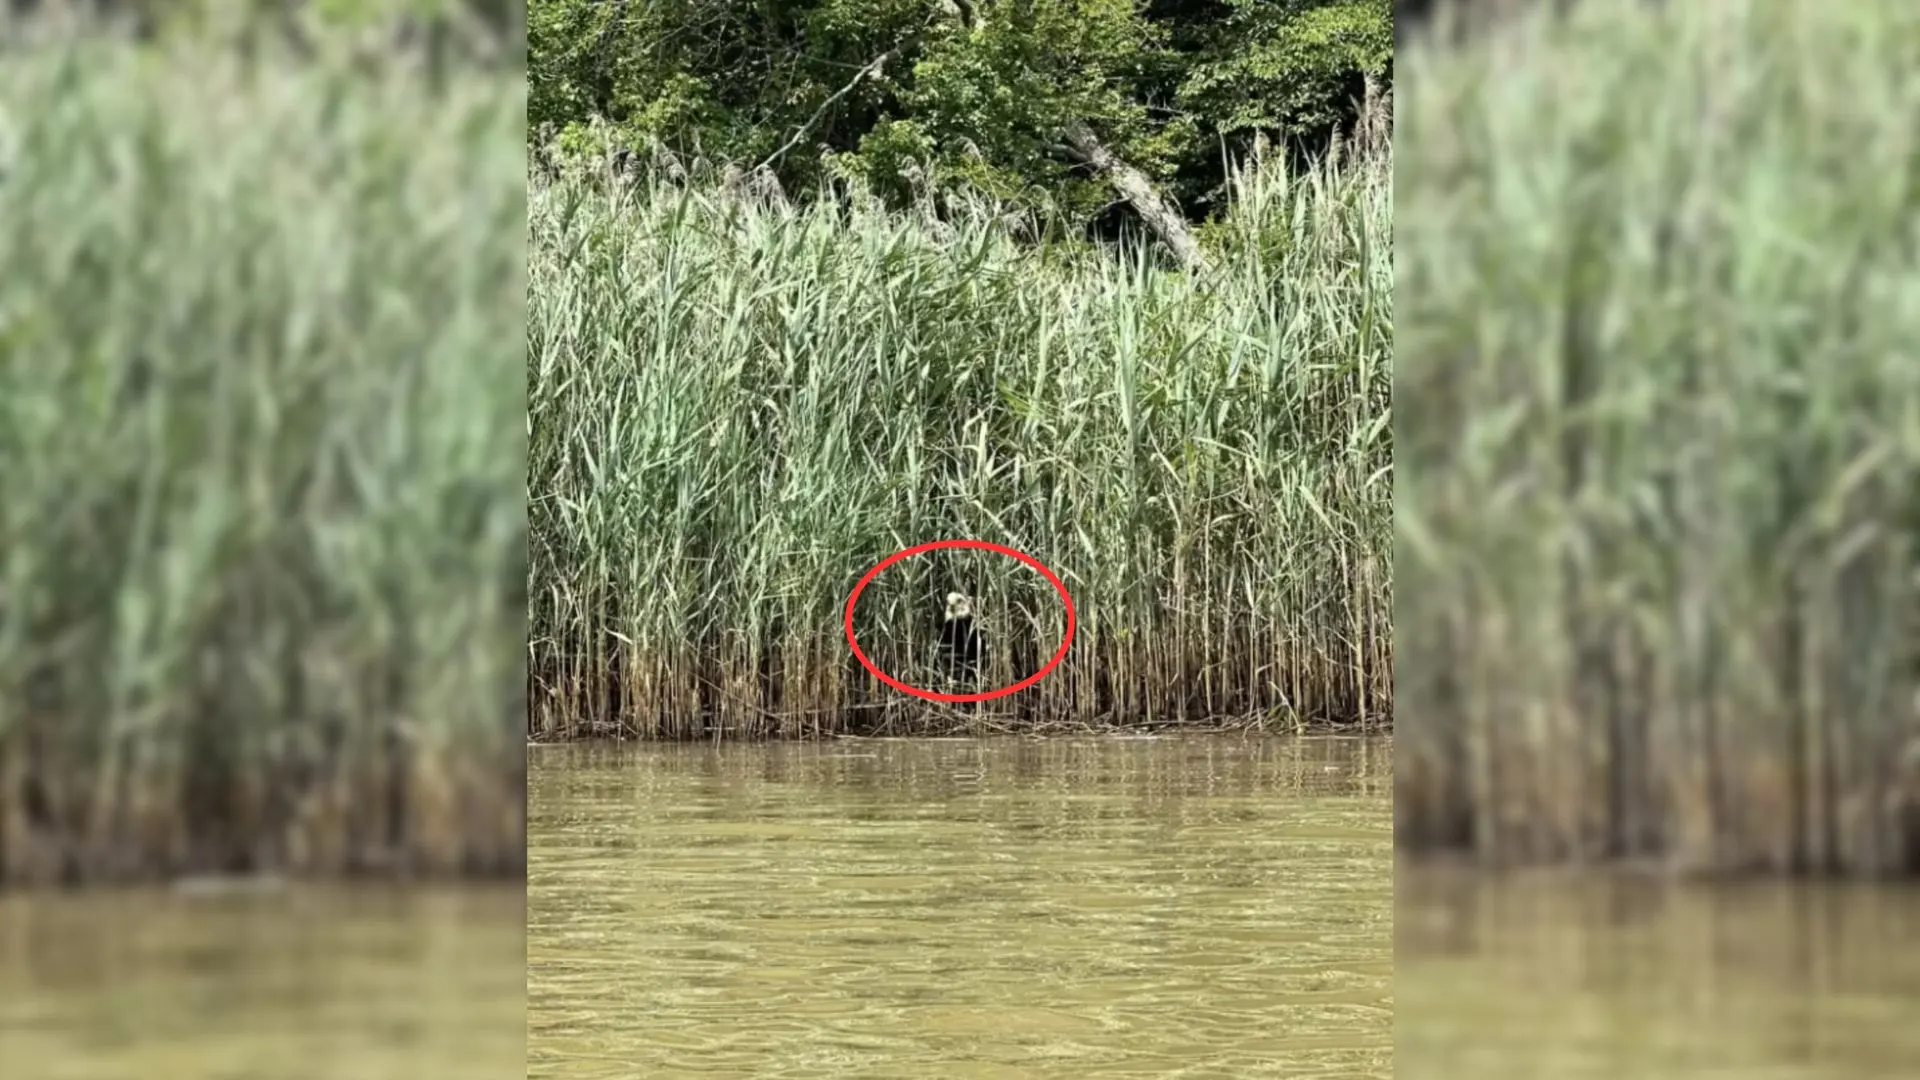 This Kayaker Noticed Something Strange In The Reeds So He Decided To Investigate